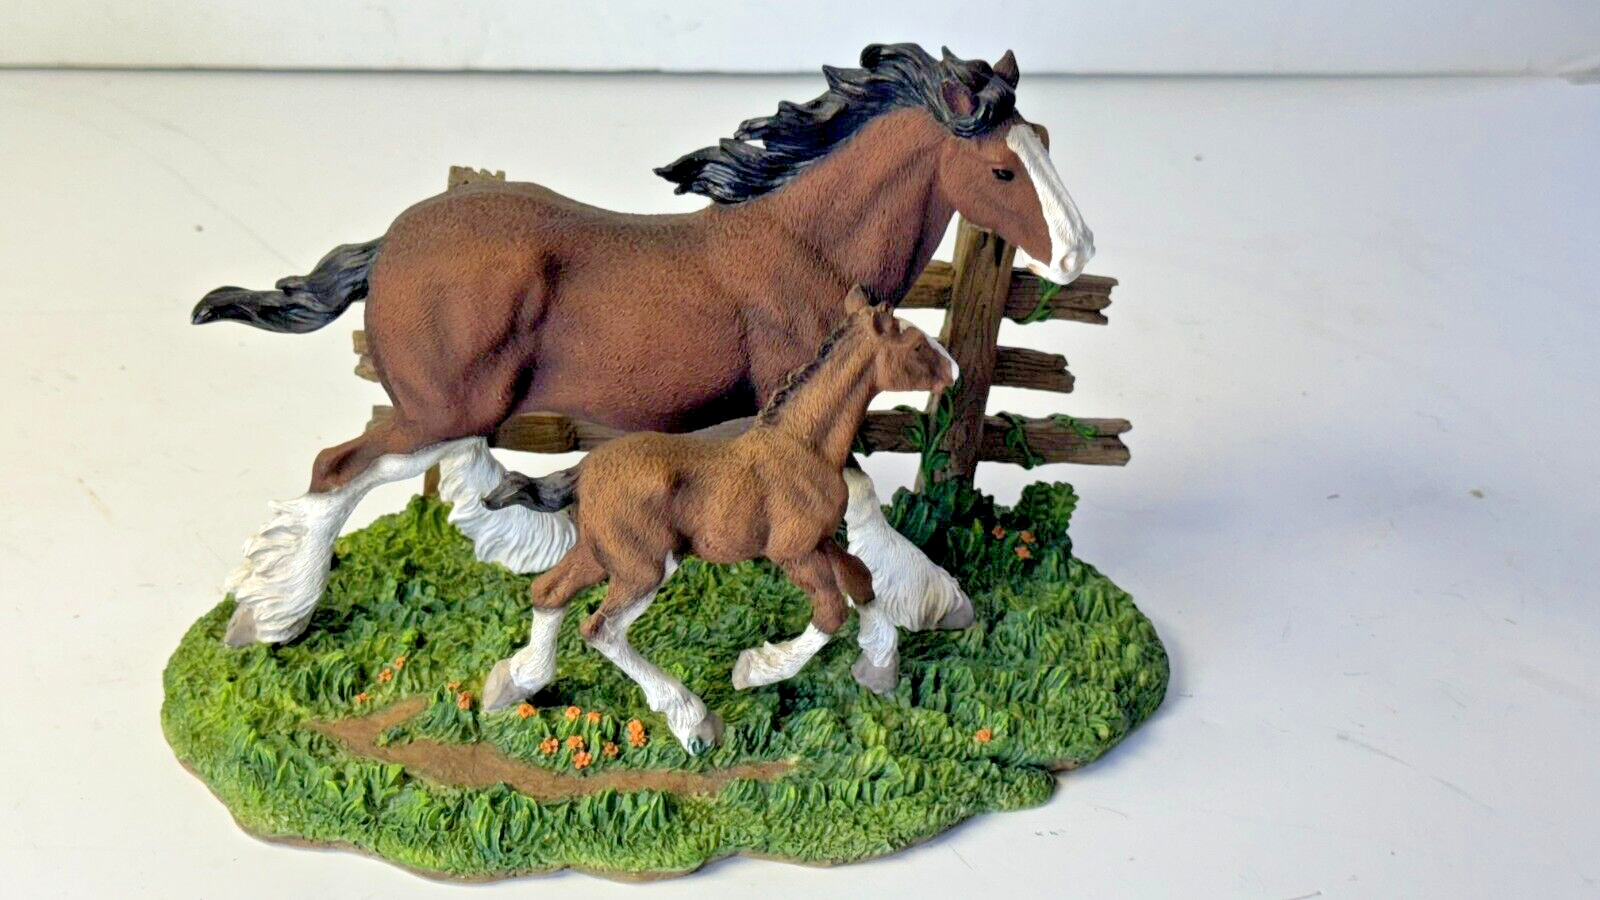 Anheuser Busch Clydesdale Collection “Mare And Foal” Limited Ed Figurine # 7062